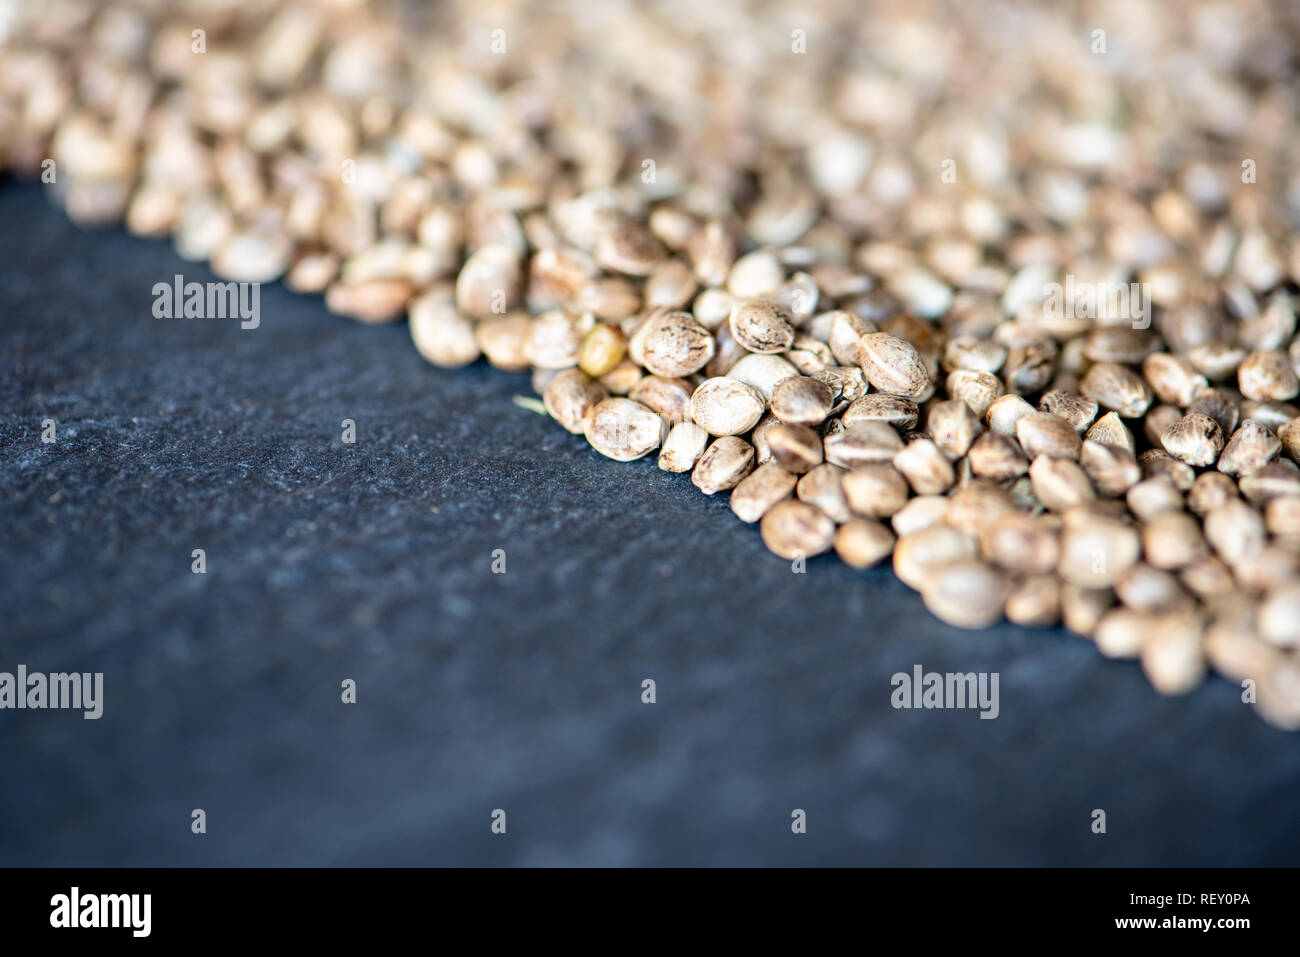 background composed of medical hemp seeds and slate surface Stock Photo